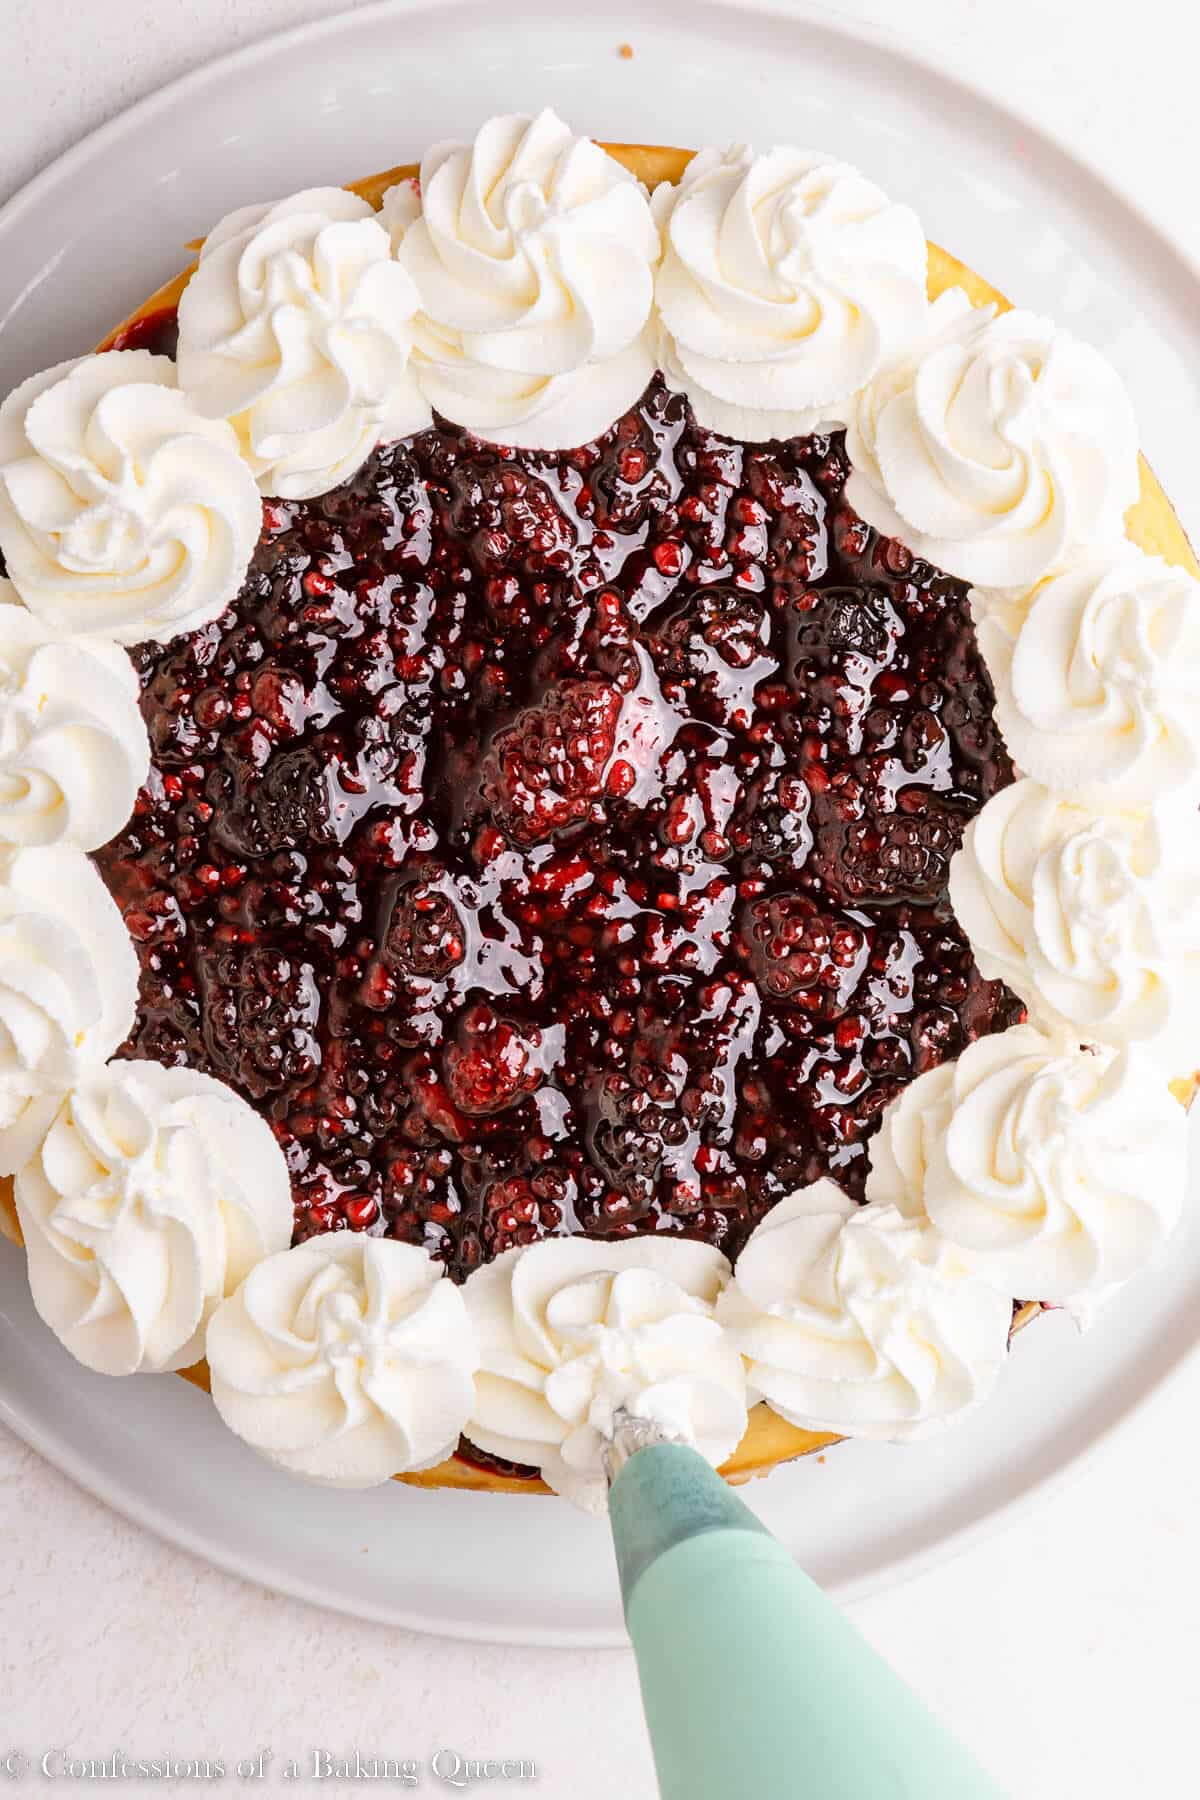 whipped cream piped on top of blackberry cheesecake on a light surface